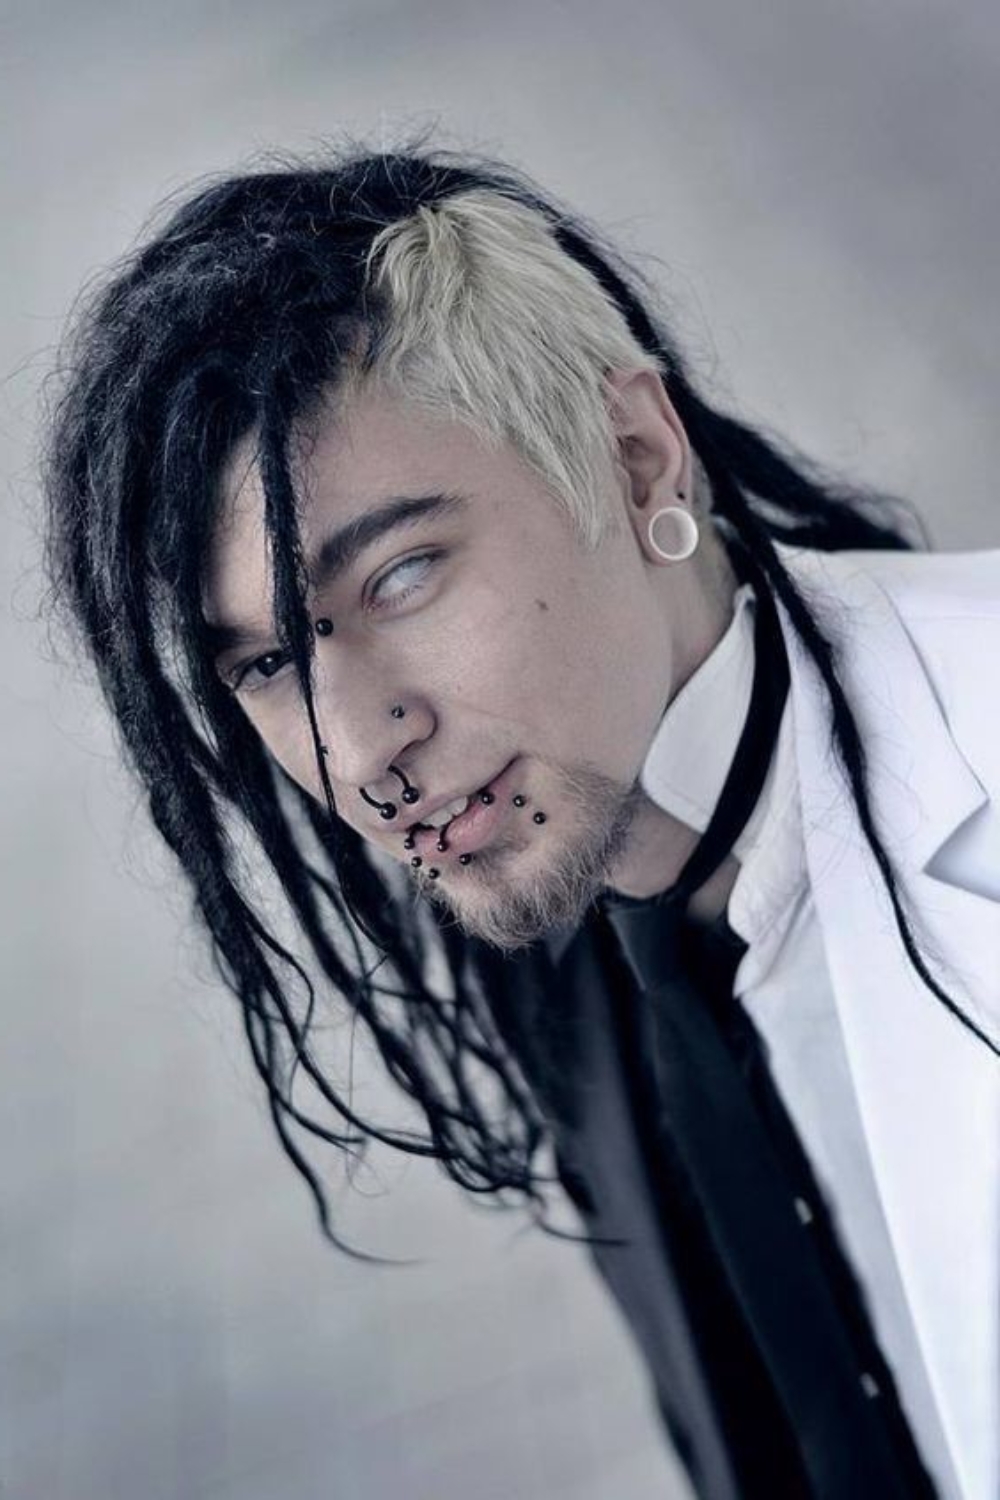 Goth Hairstyle For Men To Show Their Edgy Style